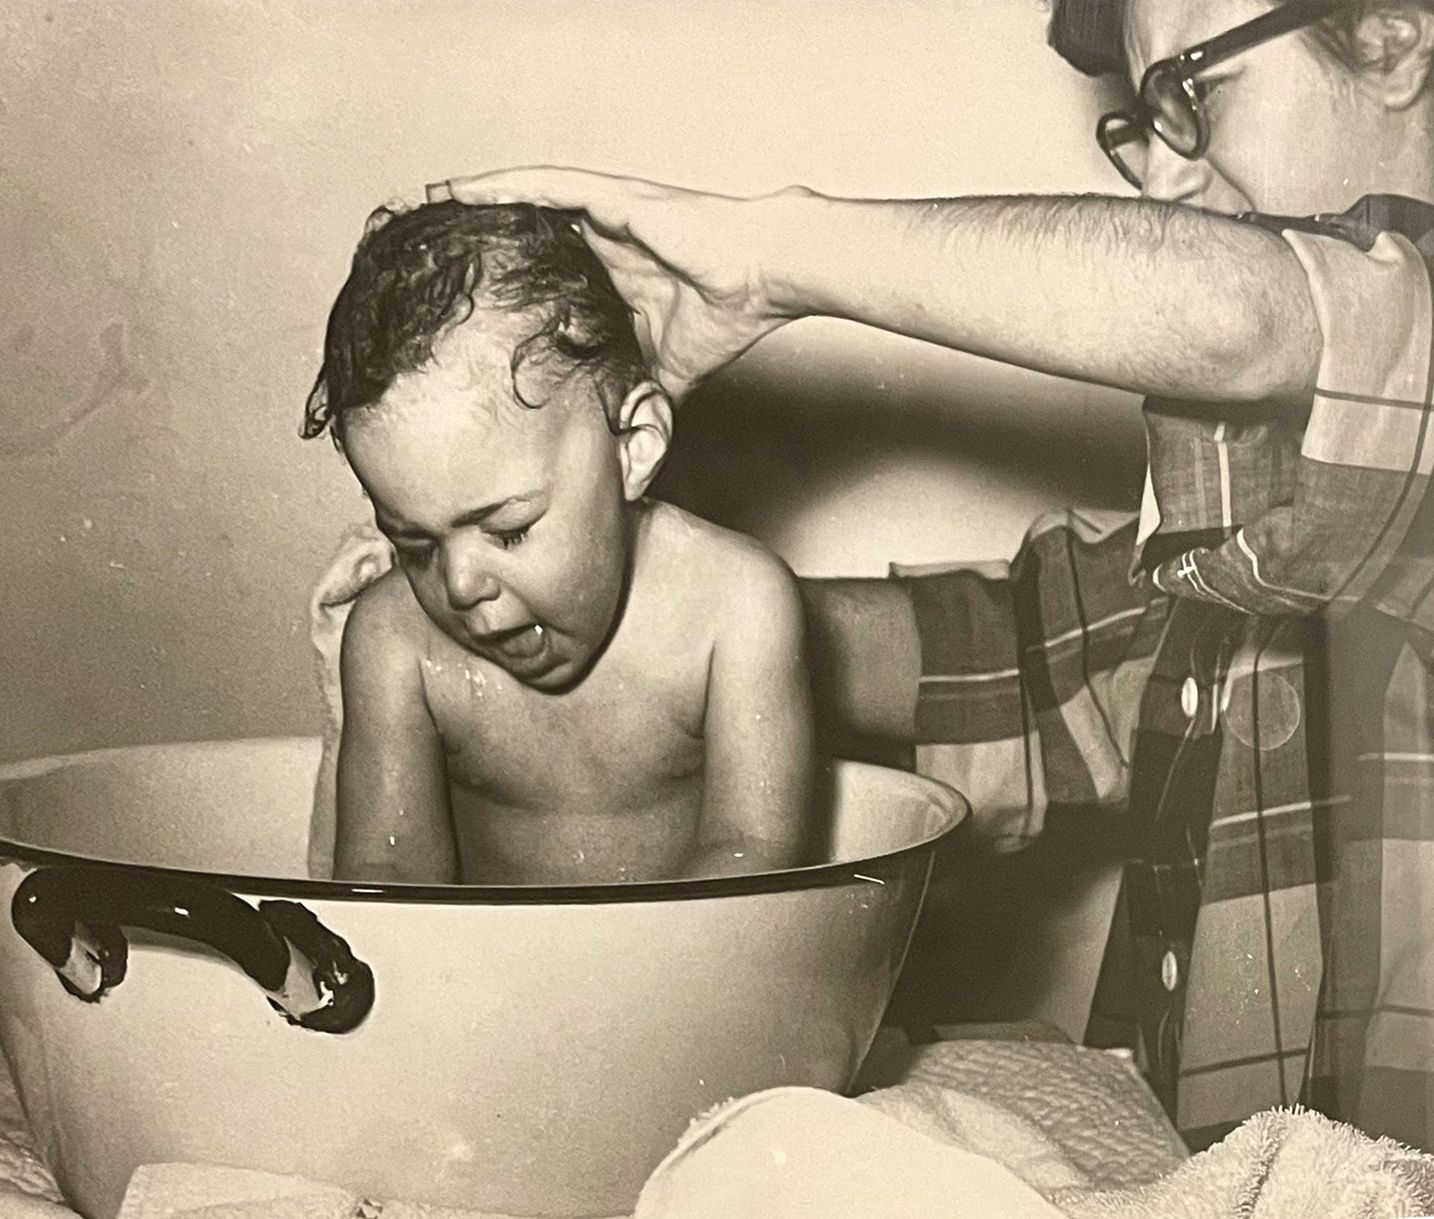 sepia photo of a baby being bathed in a wash basin, courtesy Nancy Taylor